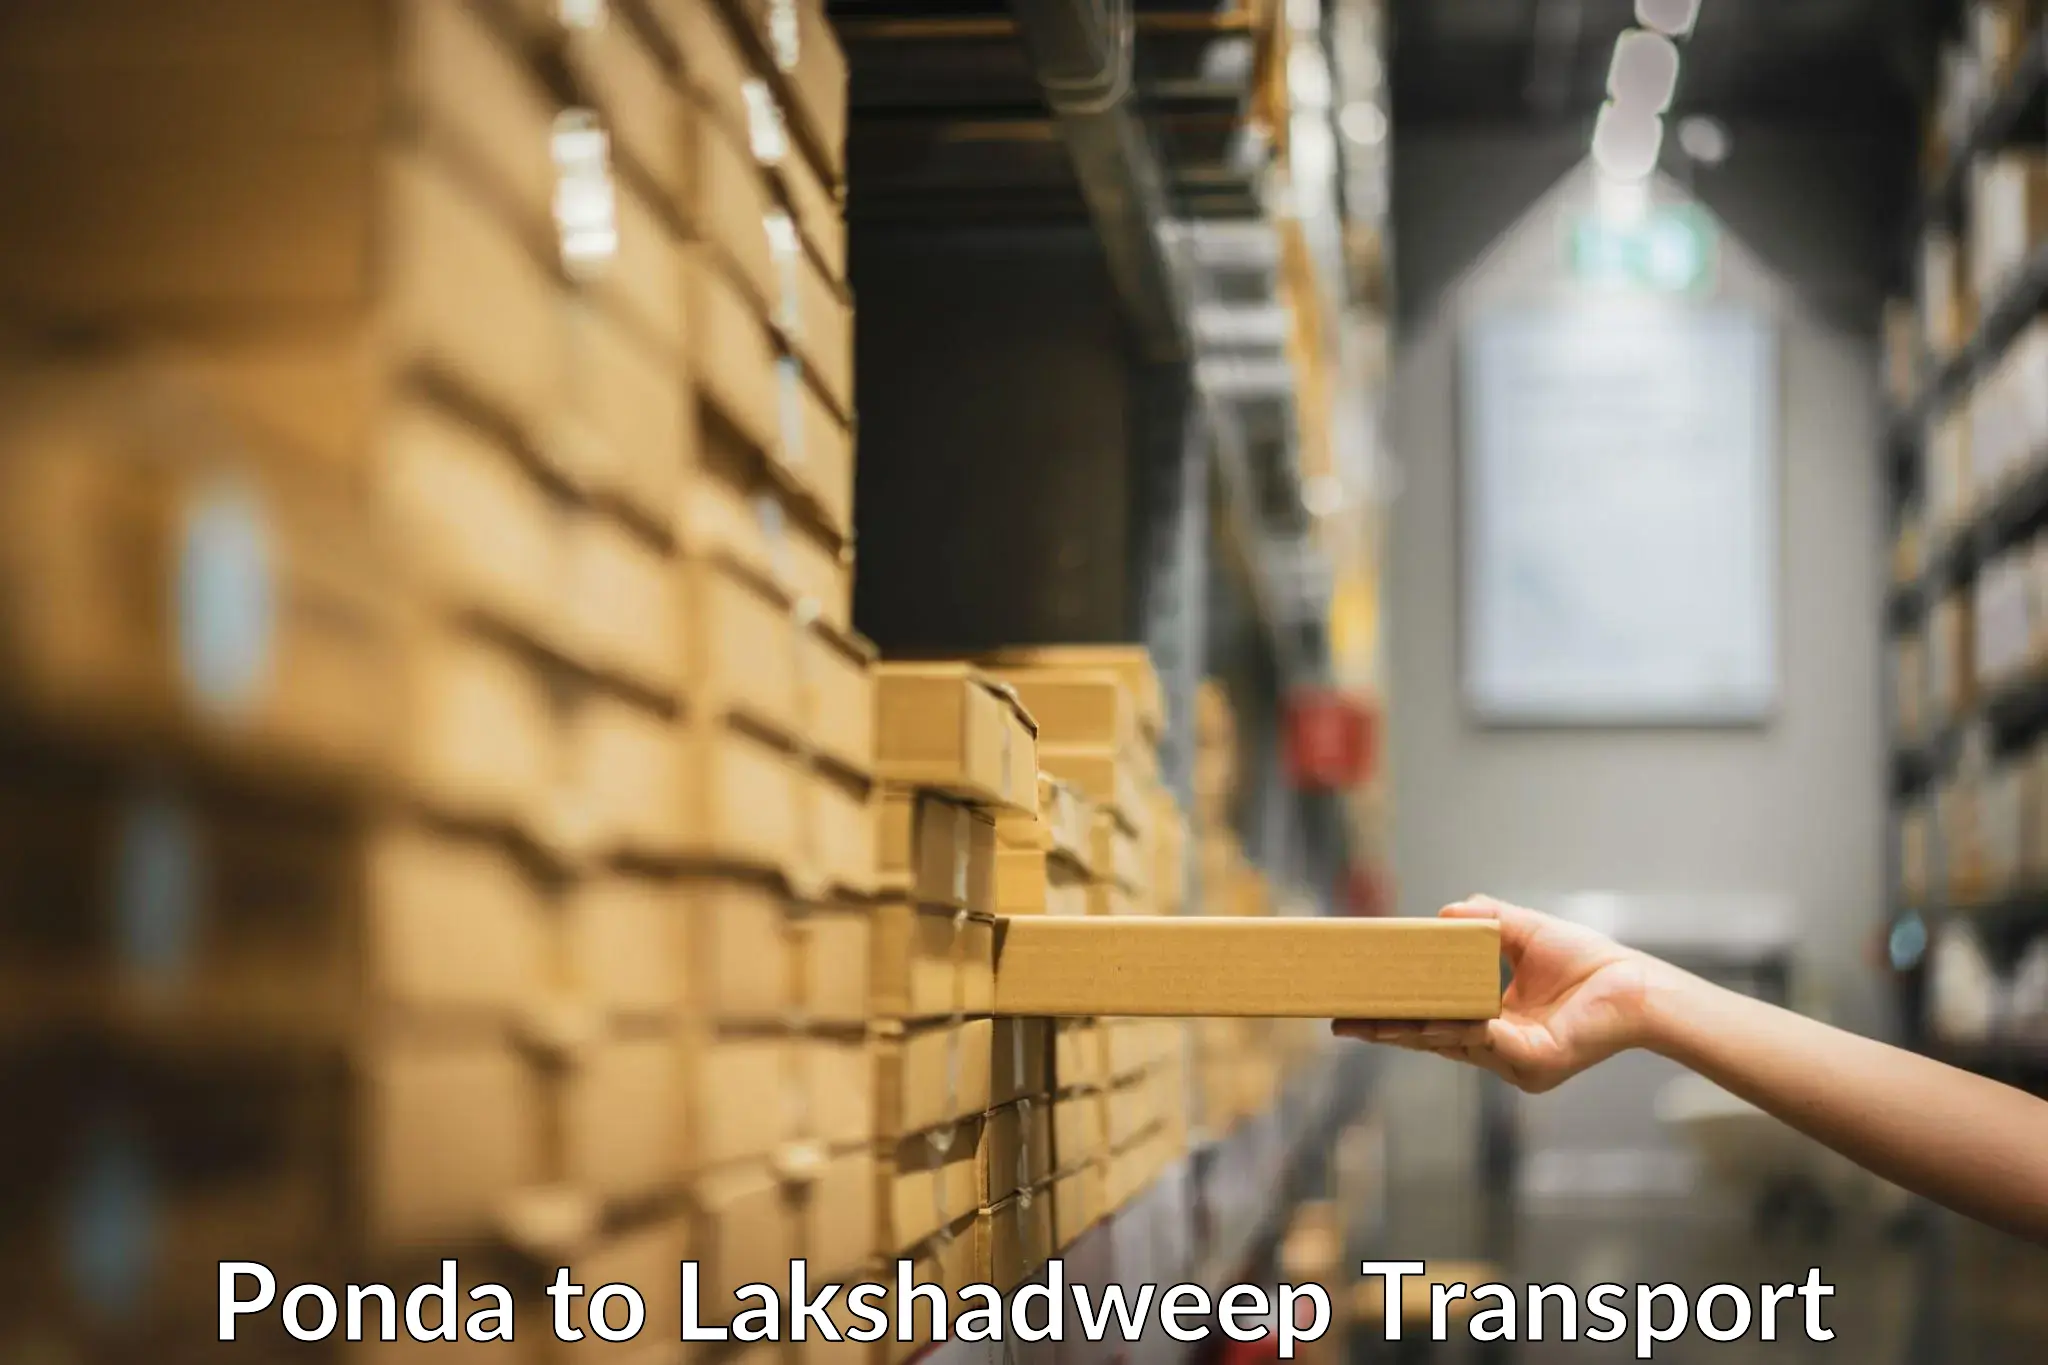 Container transport service Ponda to Lakshadweep